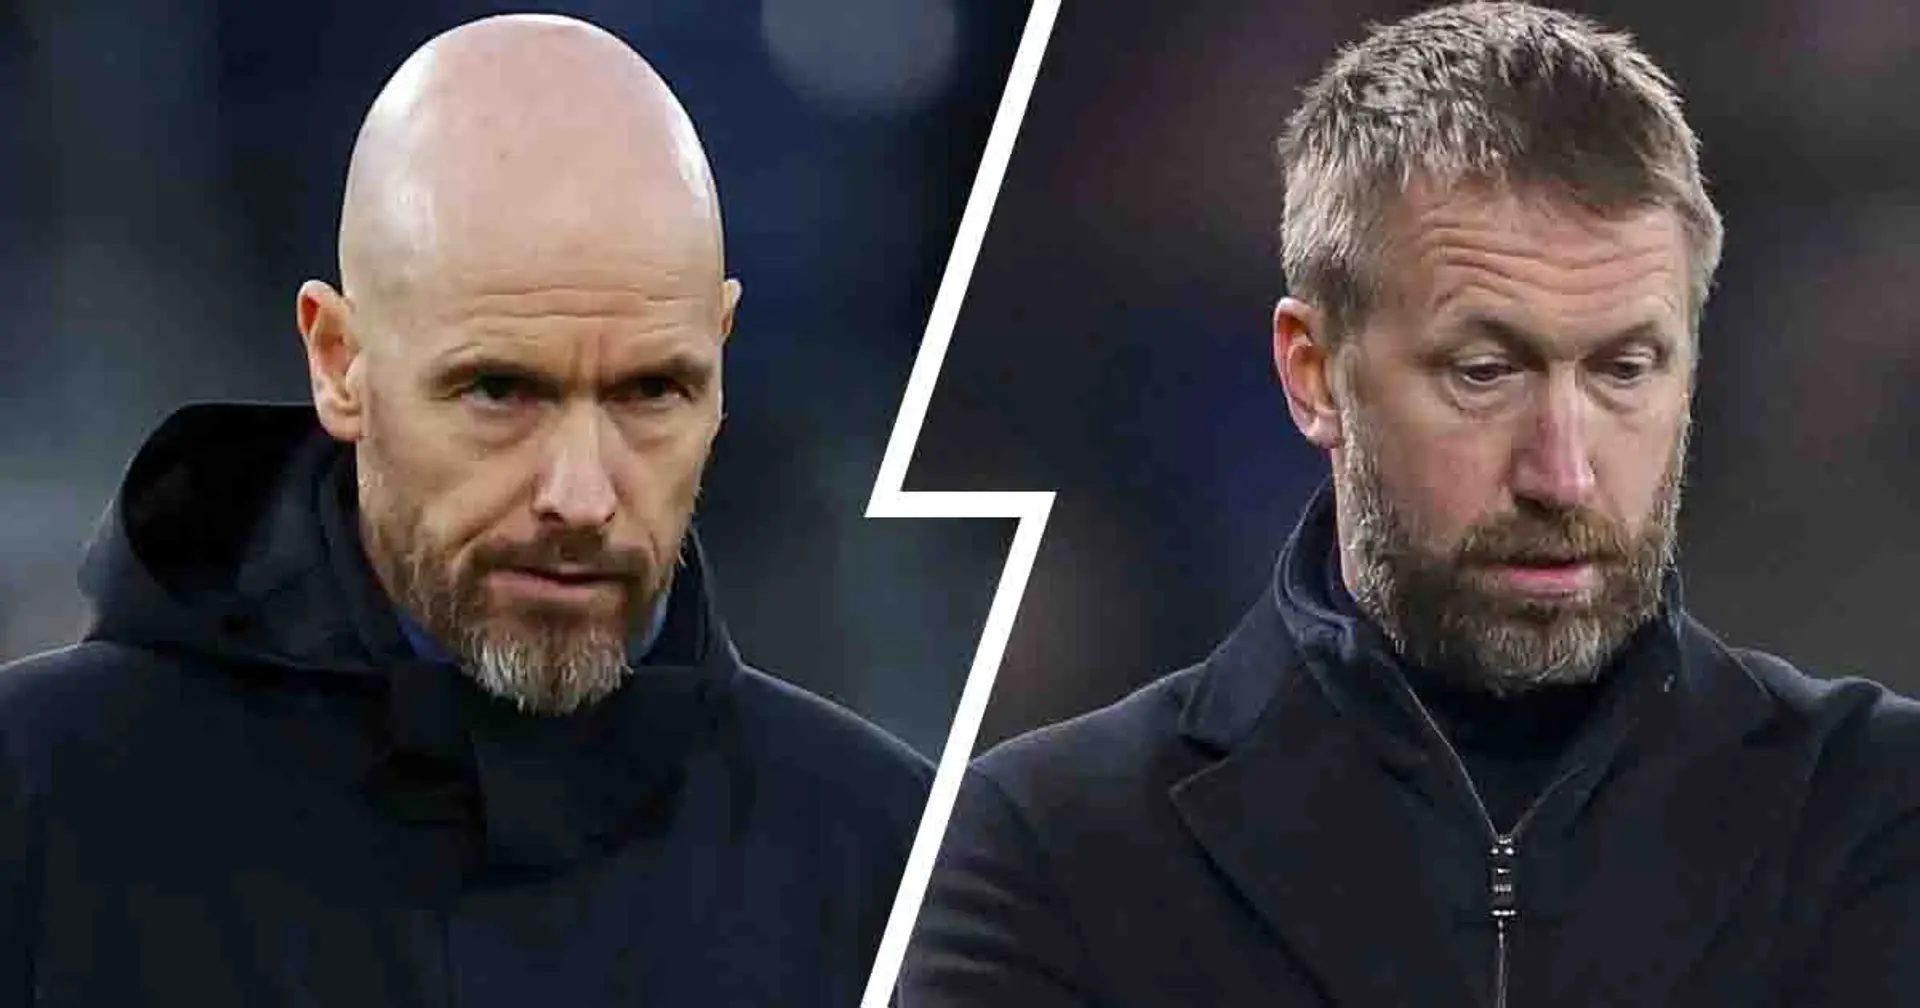 Are Man United interested in replacing Ten Hag with Graham Potter? Top source gives update